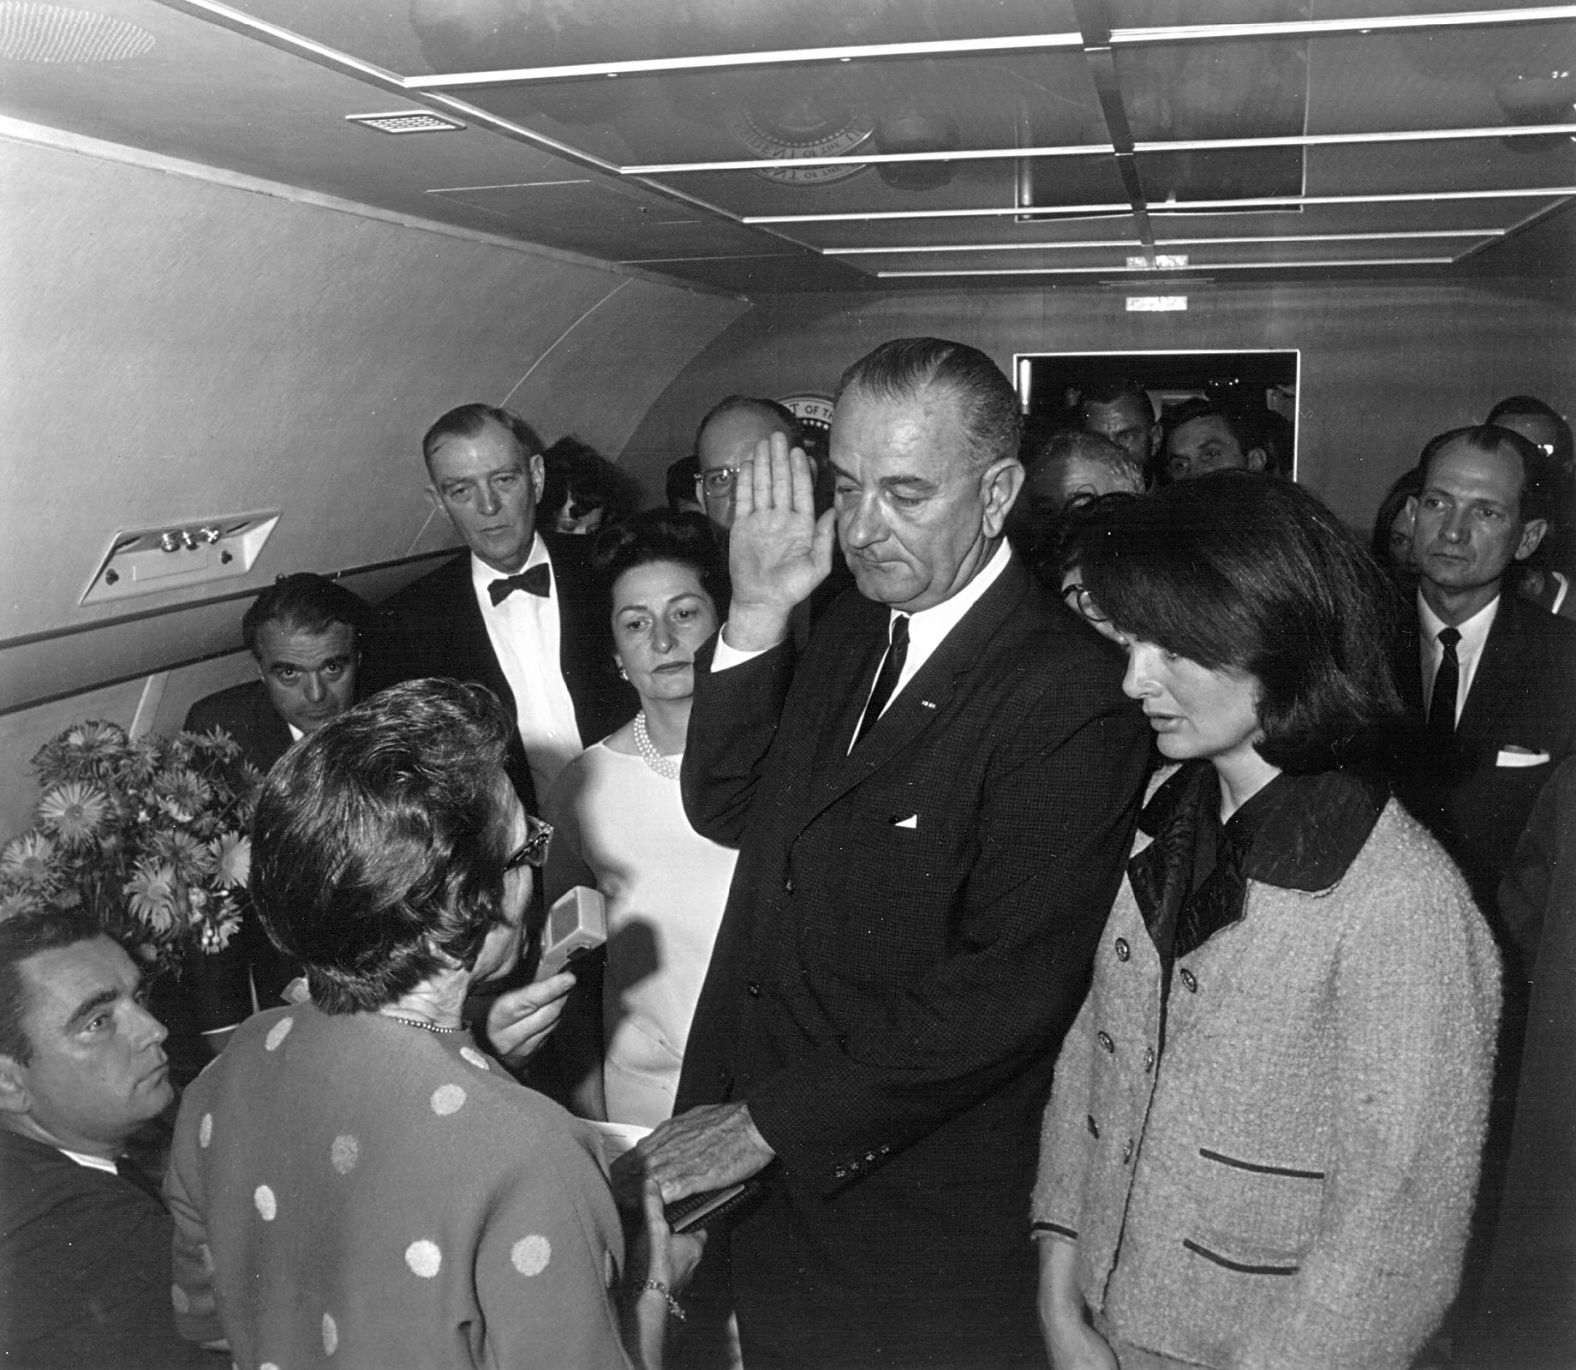 Hours after Kennedy's shooting, Johnson takes the oath of office to become the 36th president of the United States. He was aboard Air Force One as it was on the runway at Love Field. He was sworn in by US Federal Judge Sarah T. Hughes, left, with Jacqueline Kennedy by his side.